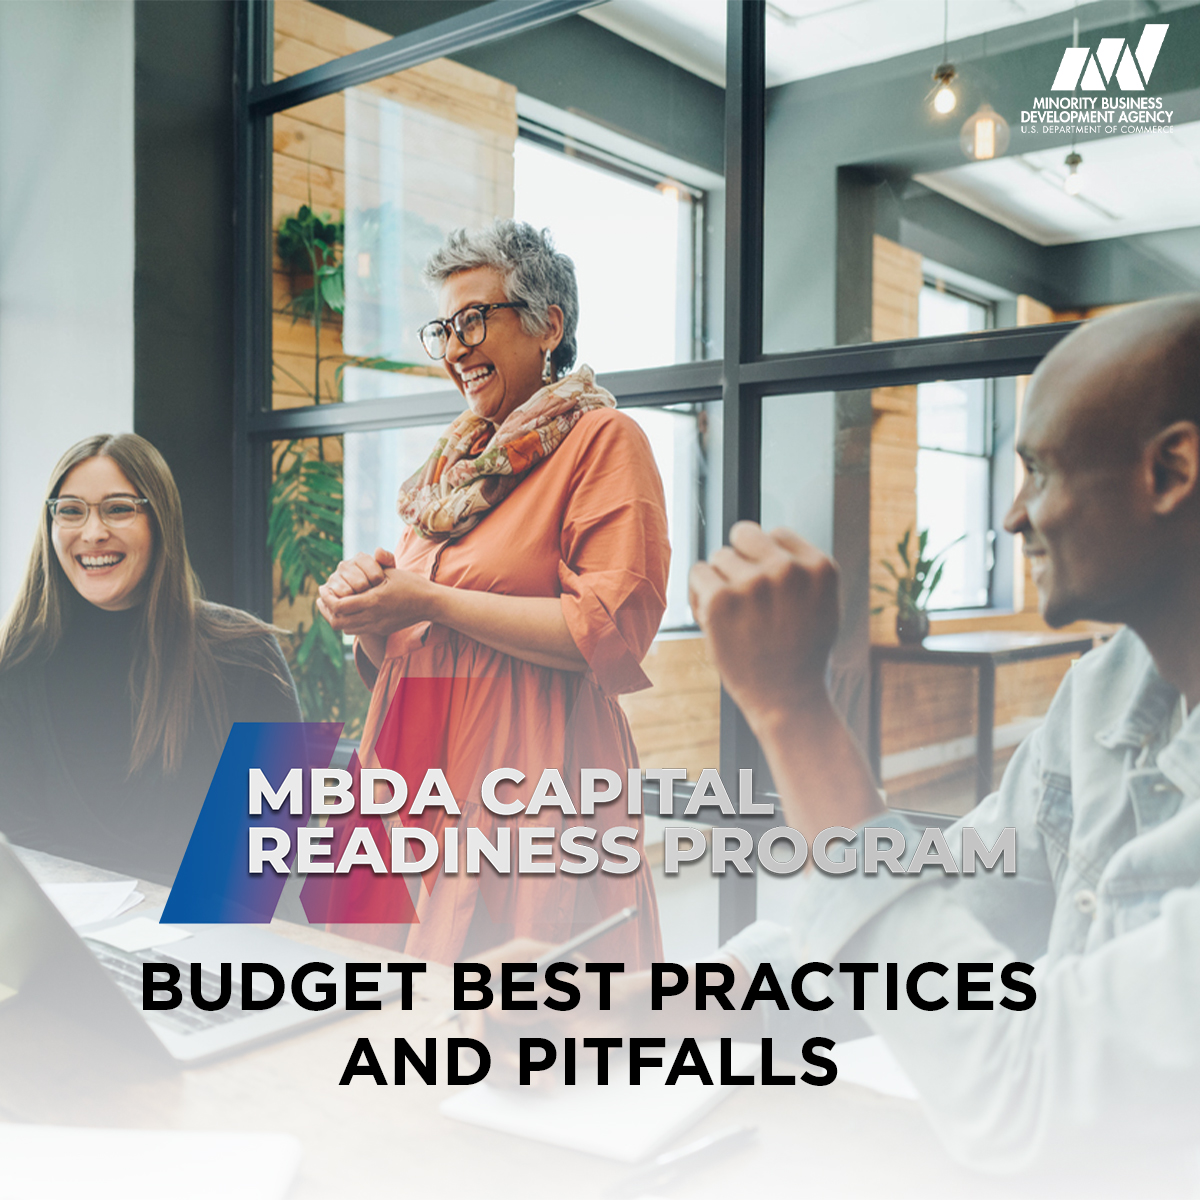 Budget Best Practices and Pitfalls